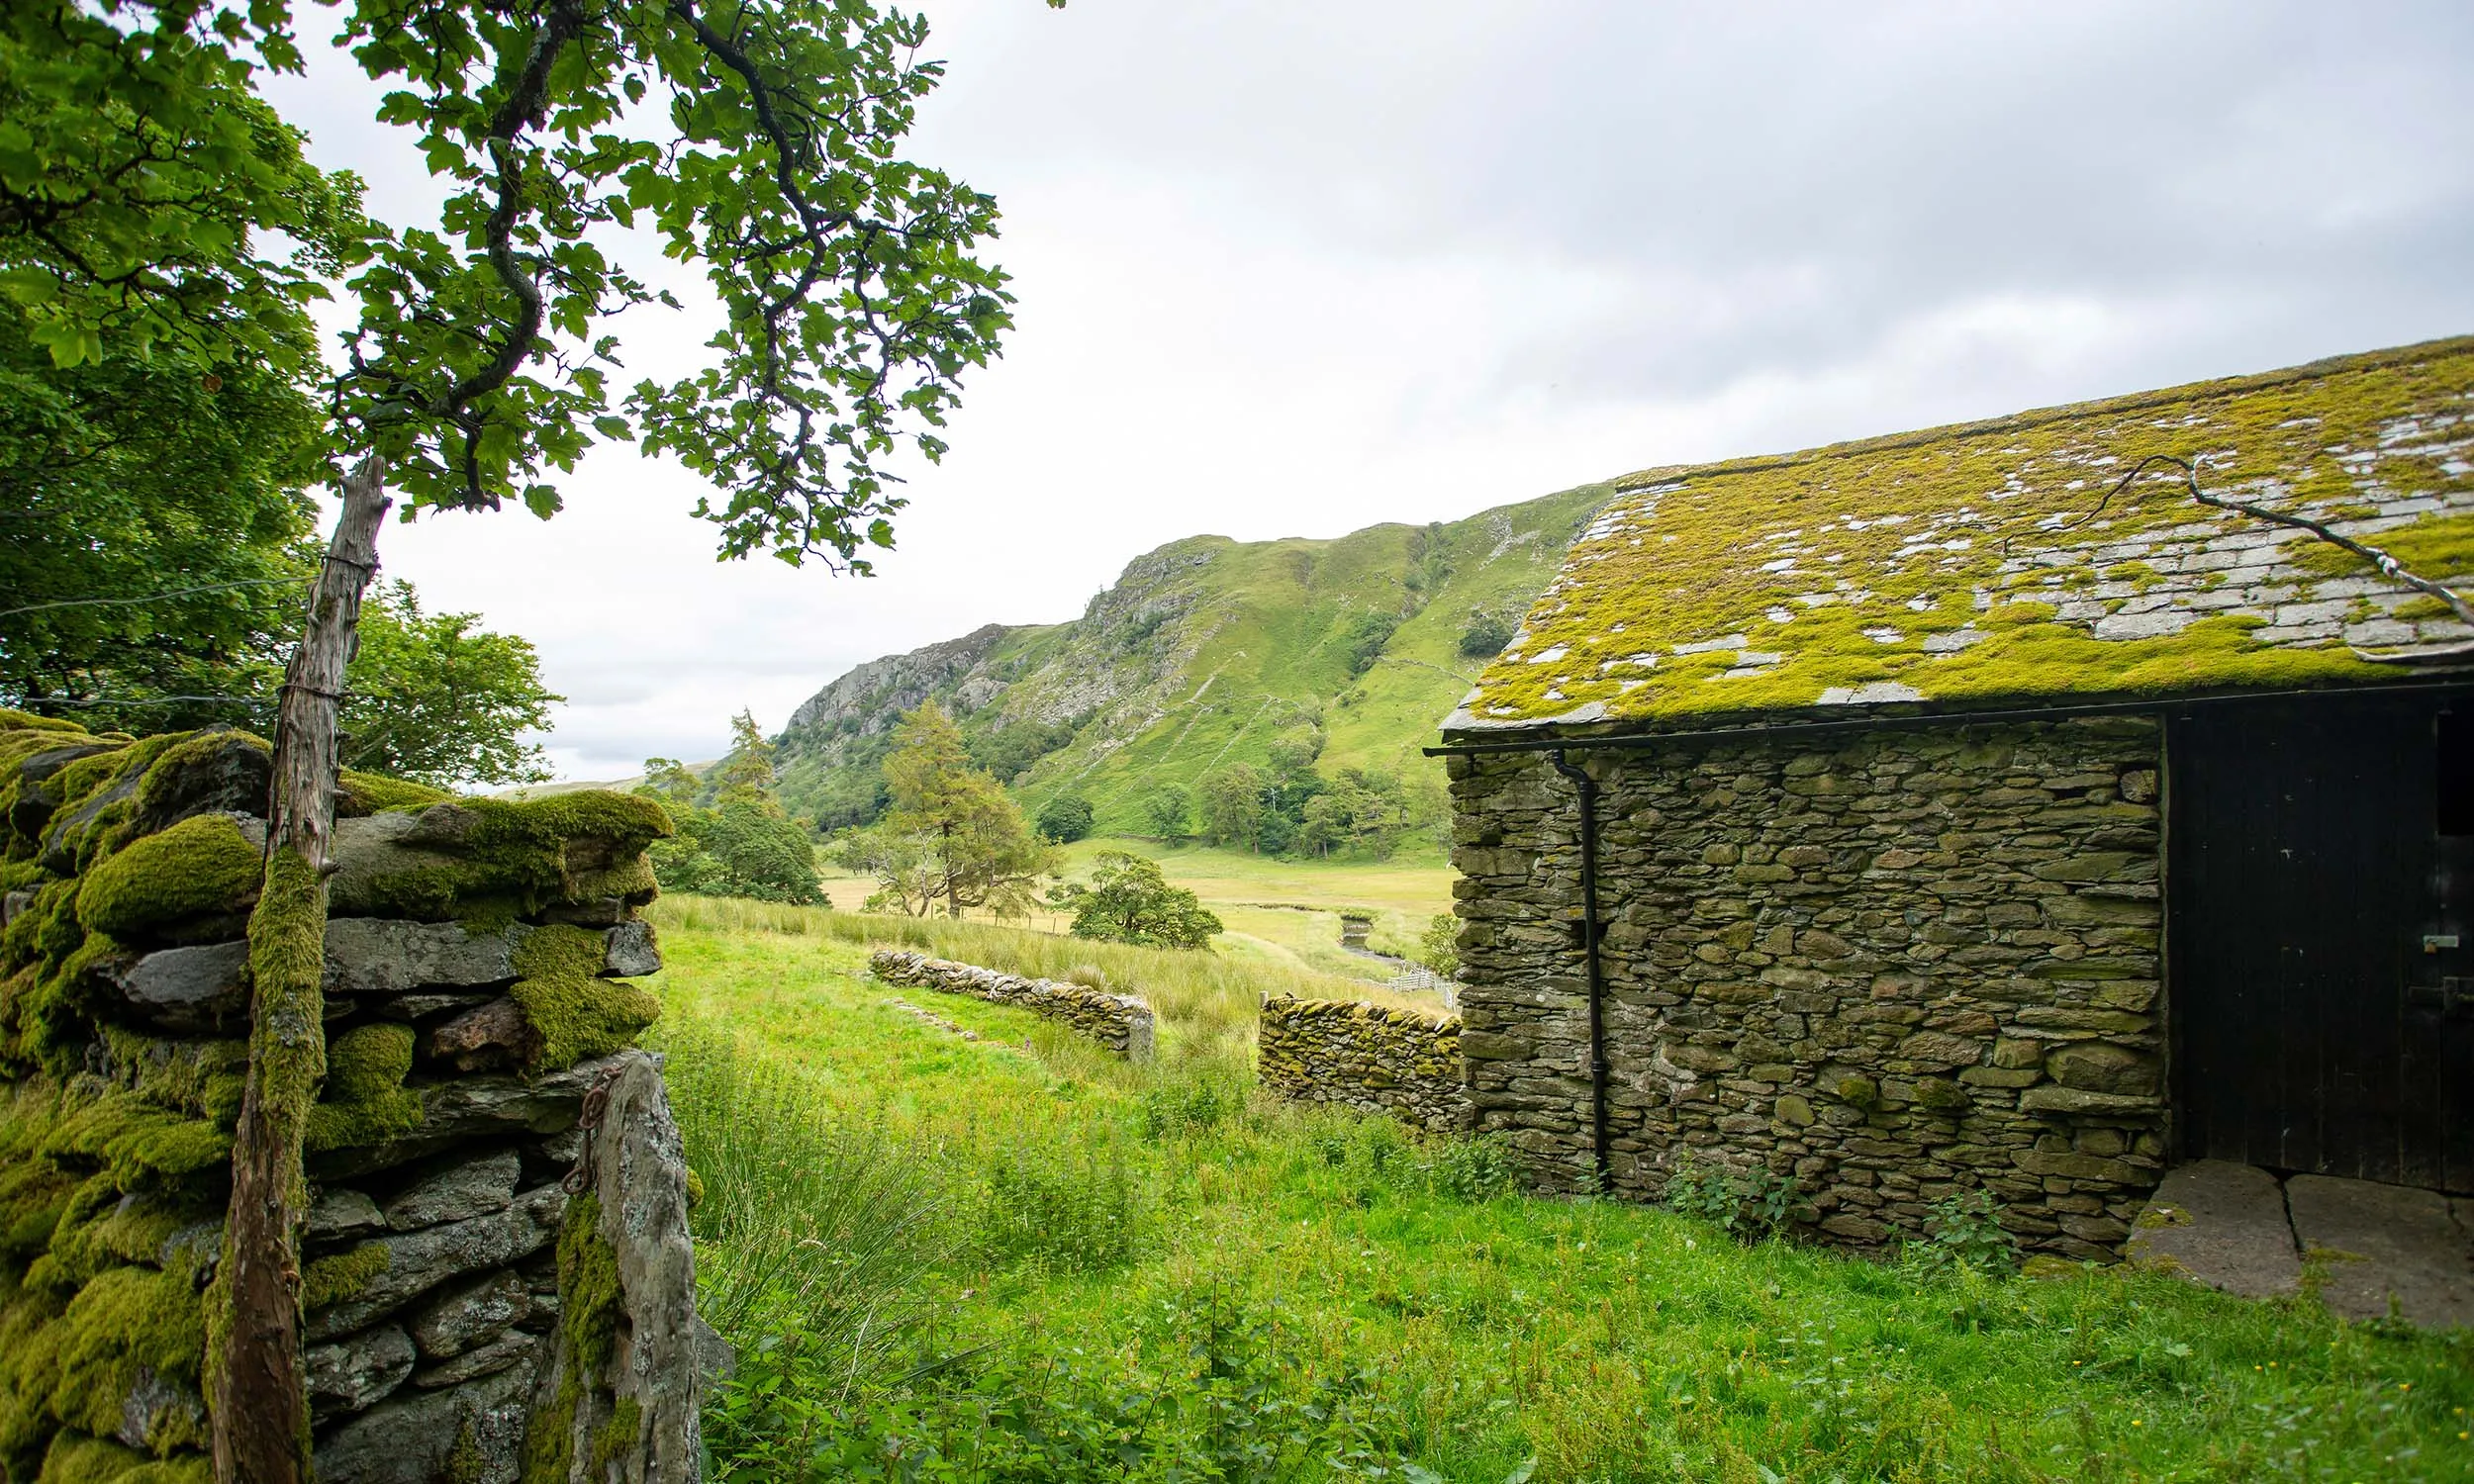 A mossy stone and slate farm building, stood on a grassy plot of land with a steep hill along the horizon.